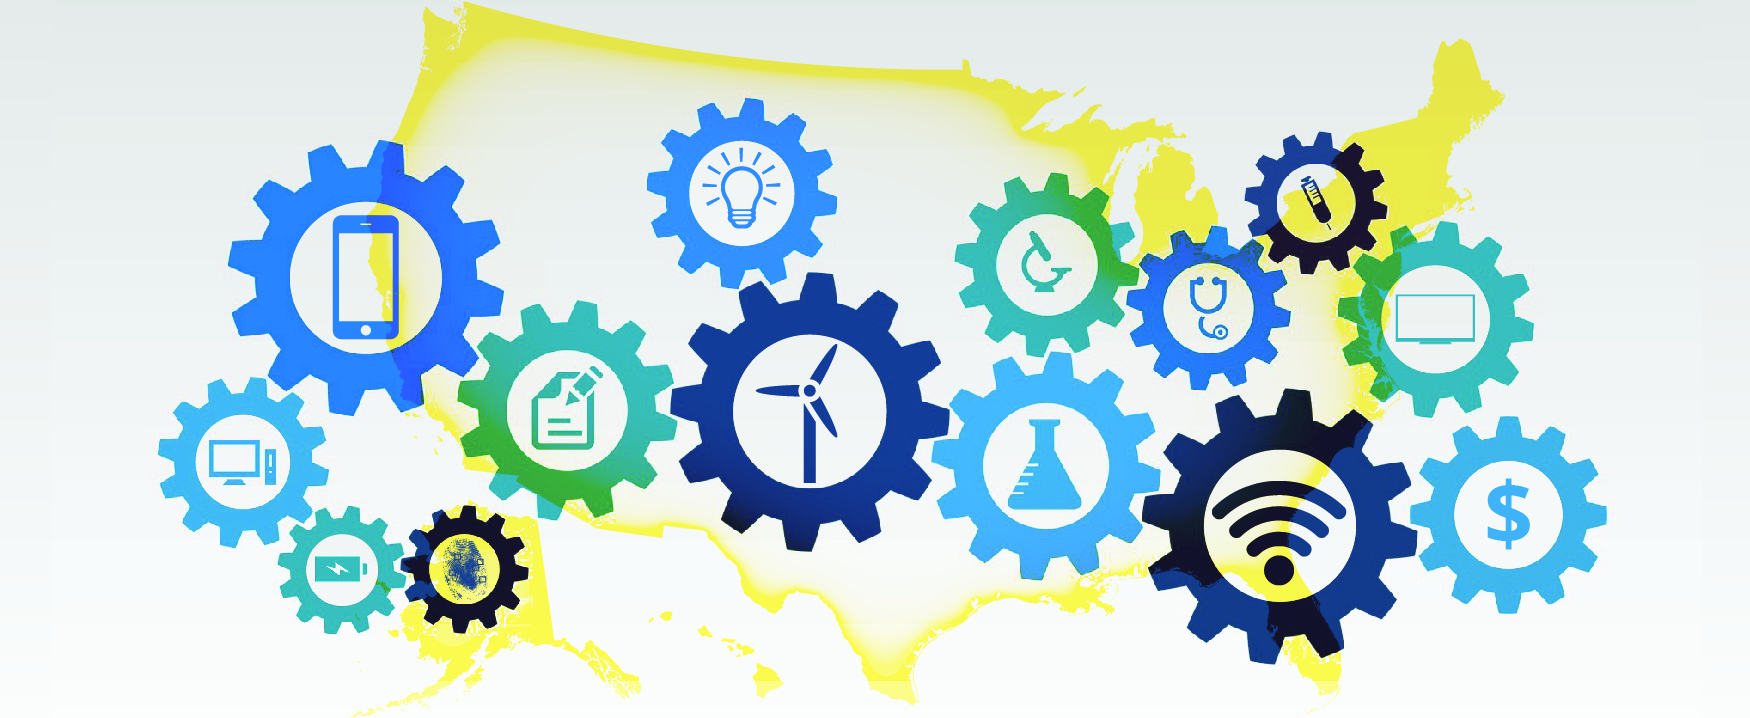 This graphic shows an outline of the United States overlaid with the simple outlines of different sized gears. In the center of the gears are simple icons, including a battery, a computer screen, a cell phone, a paper and pencil, a light bulb, a windmill, a beaker, a stethoscope, a wifi signal, a dollar sign, and a television screen.